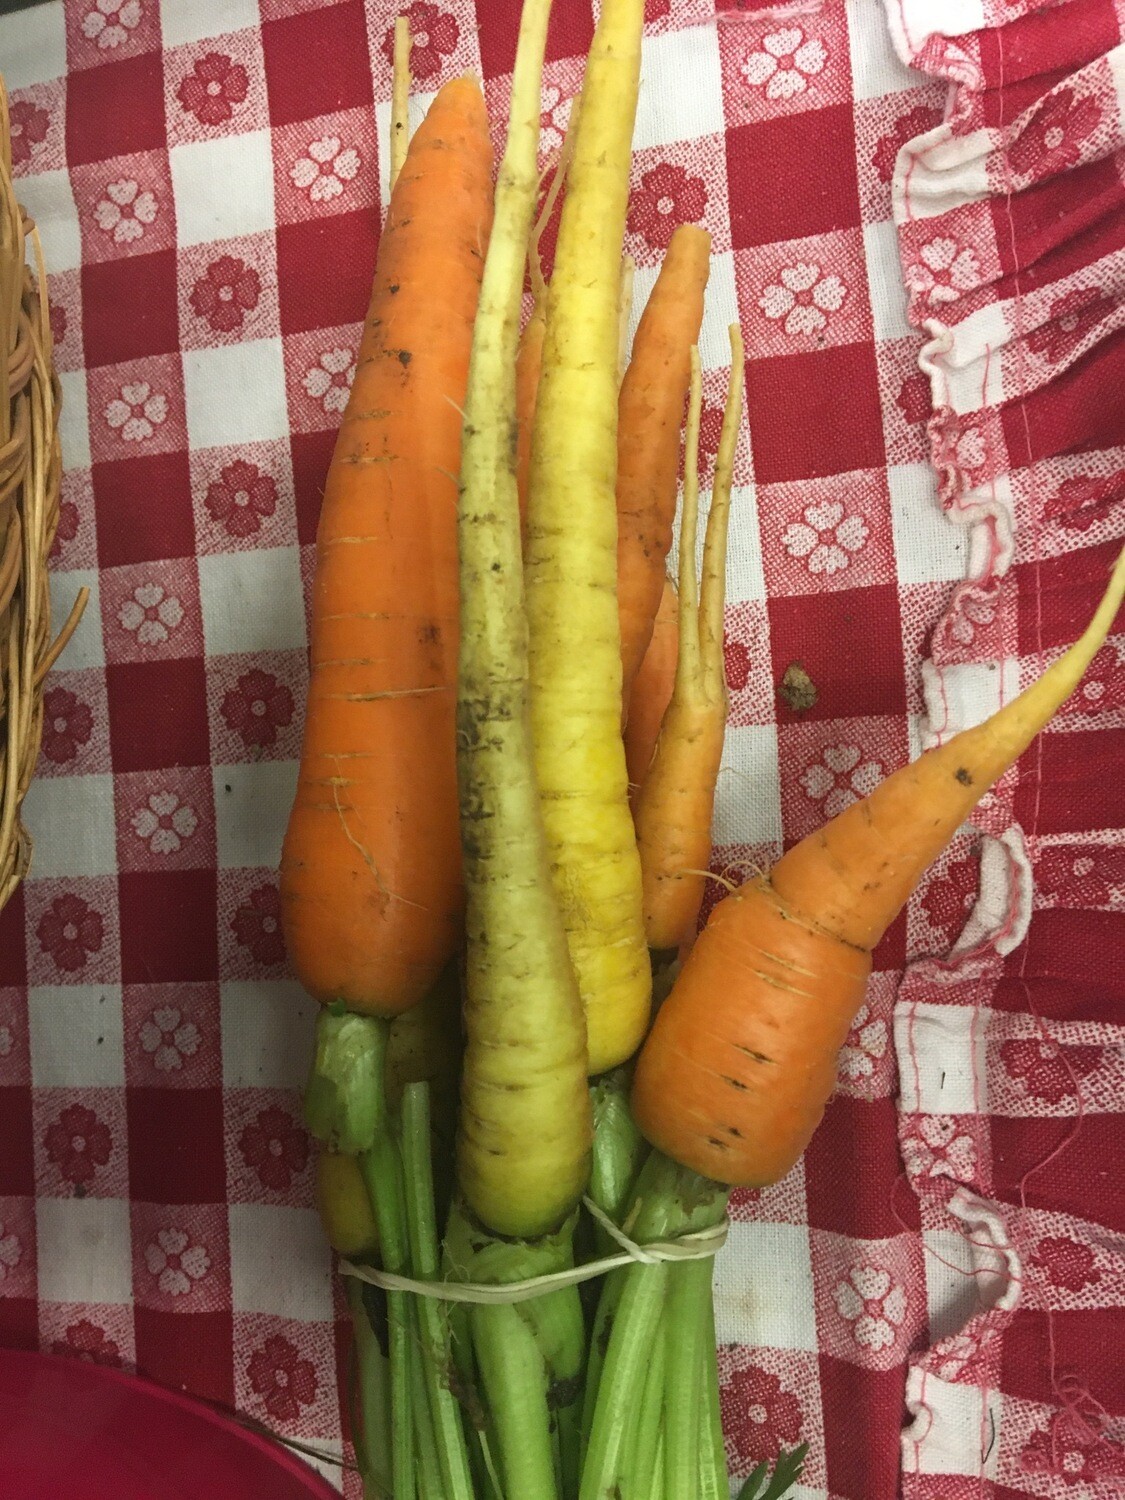 Carrots one